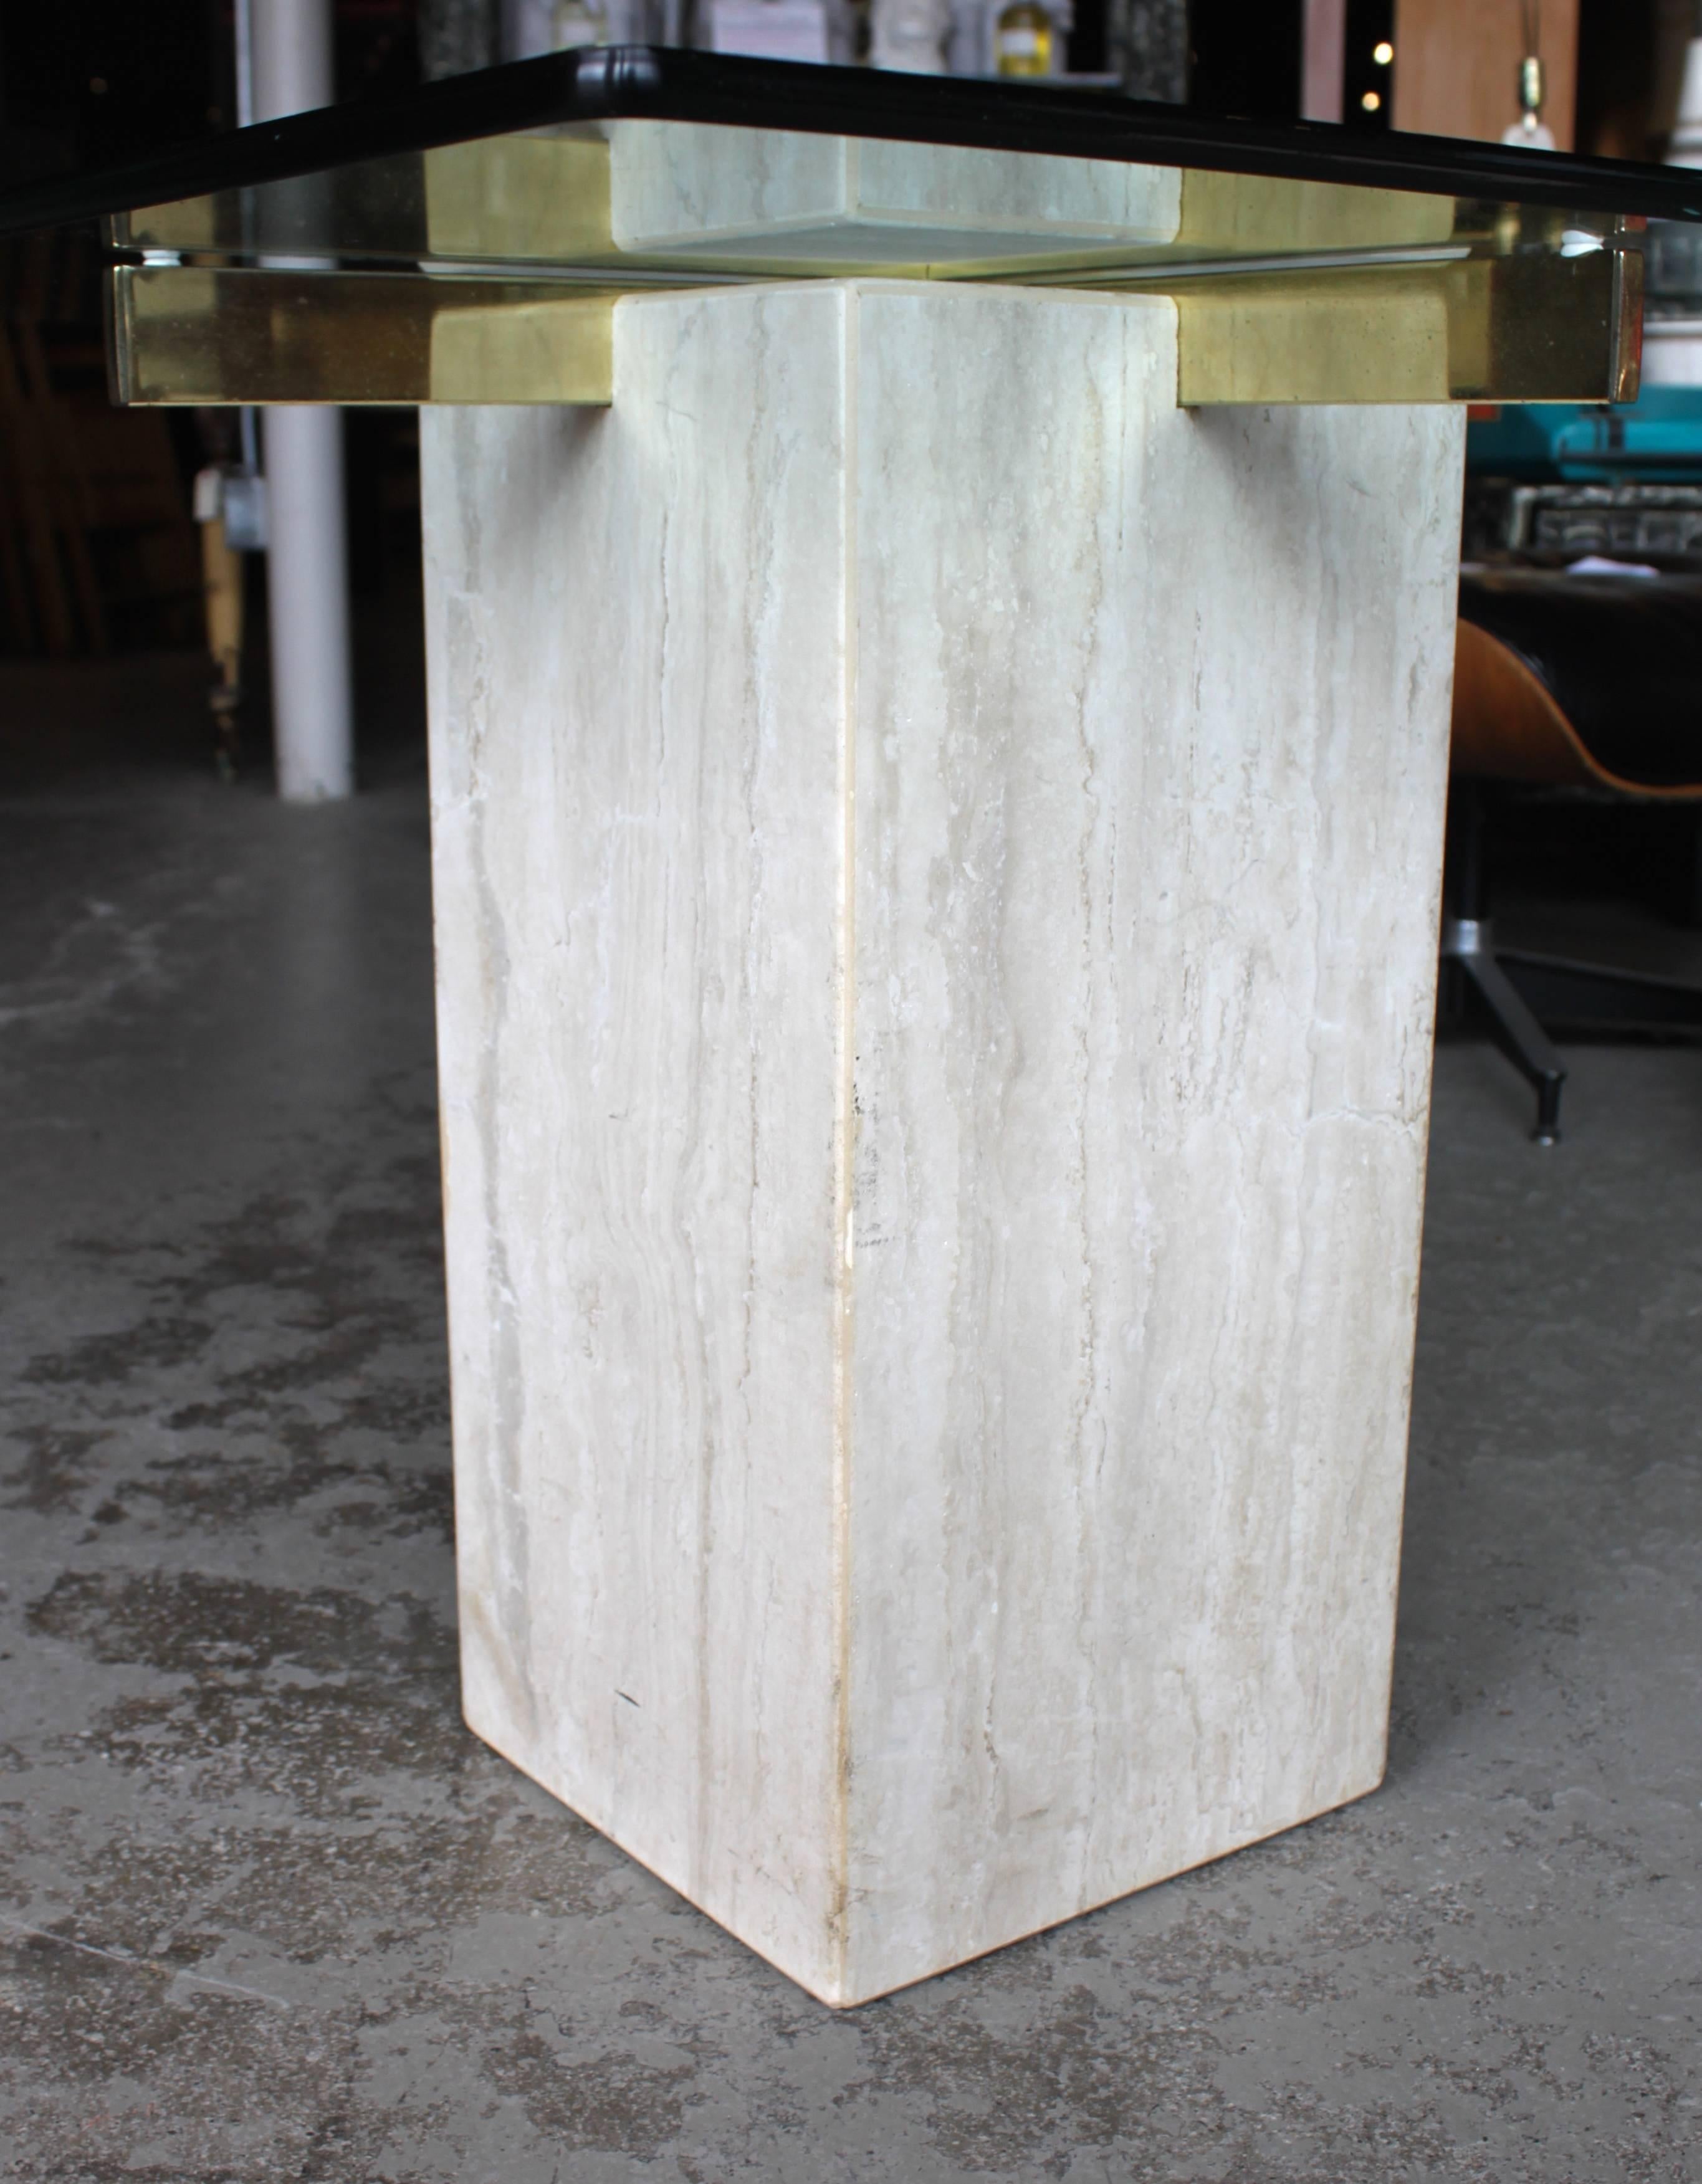 Travertine marble base glass top Artedi style end table. In beautiful vintage condition with wear to finish and glass top consistent to age and use.